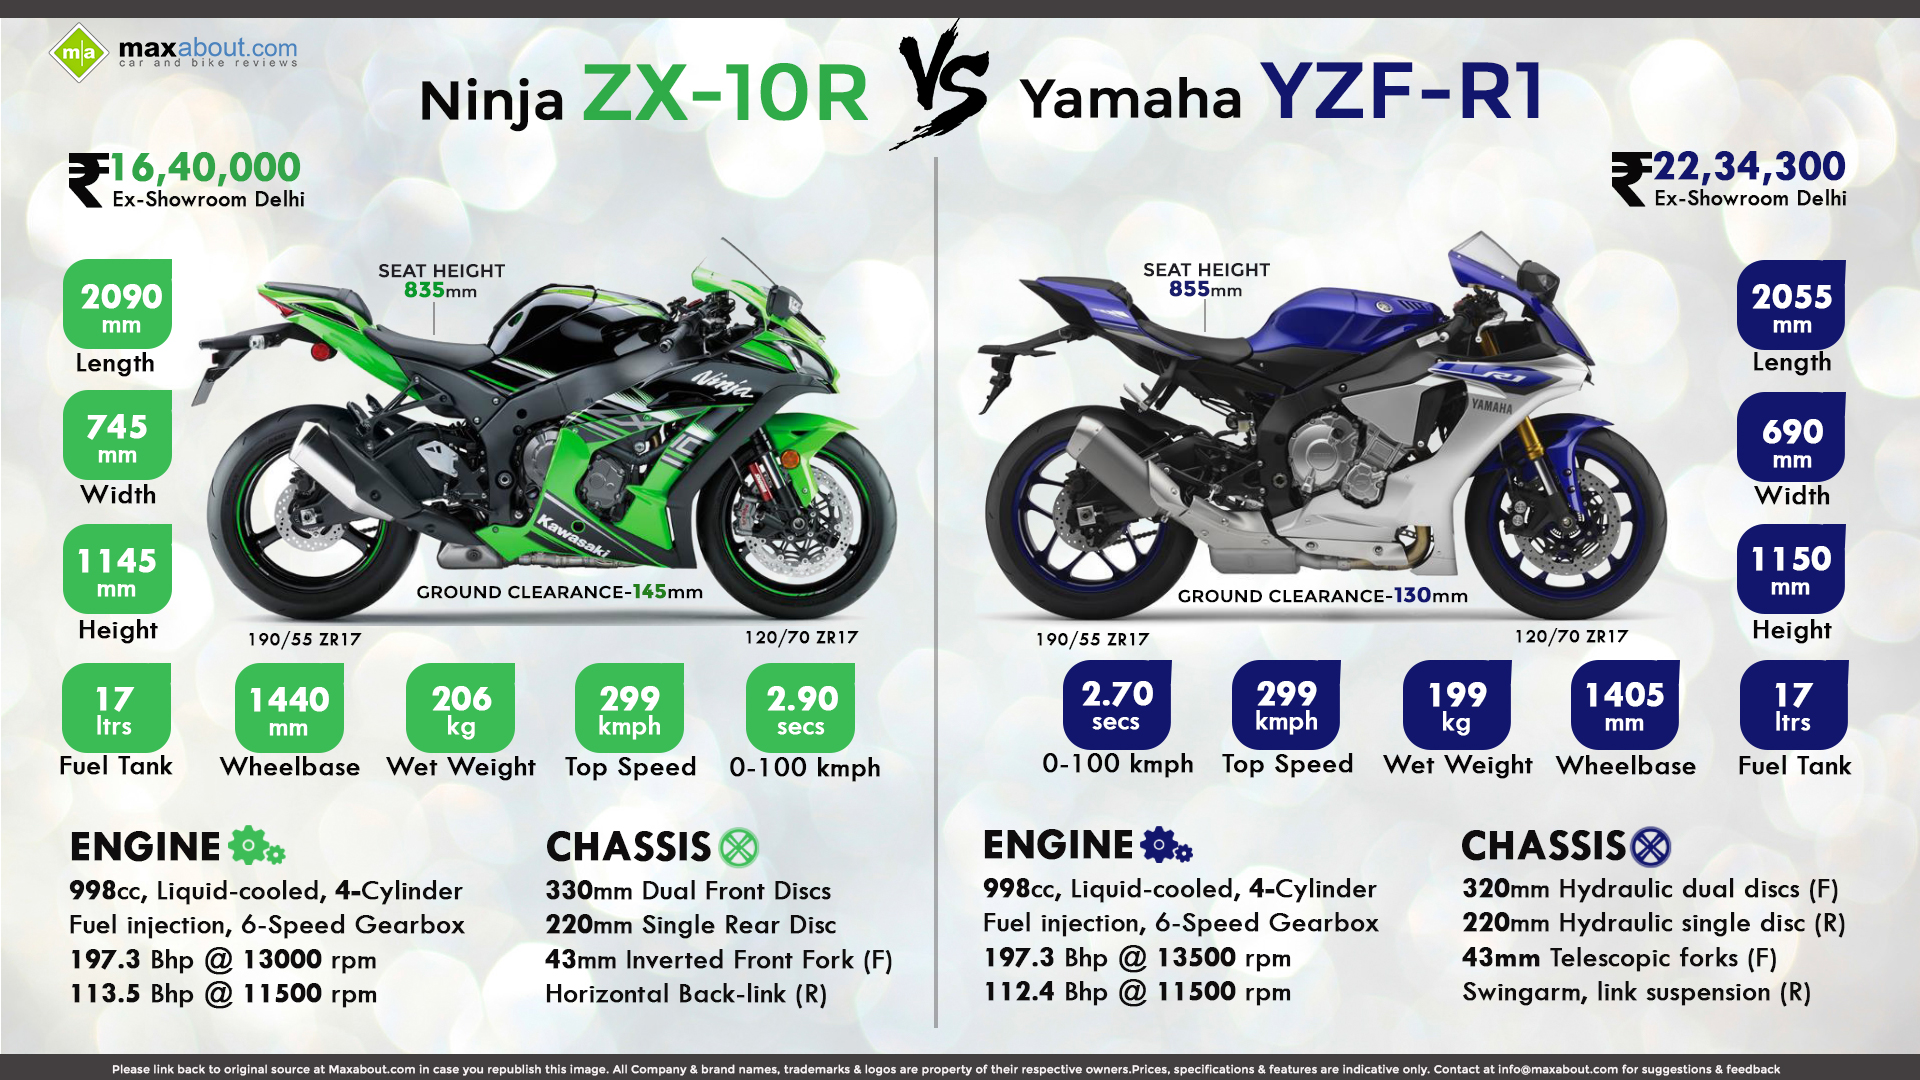 Infographics Image - Motorcycle - HD Wallpaper 